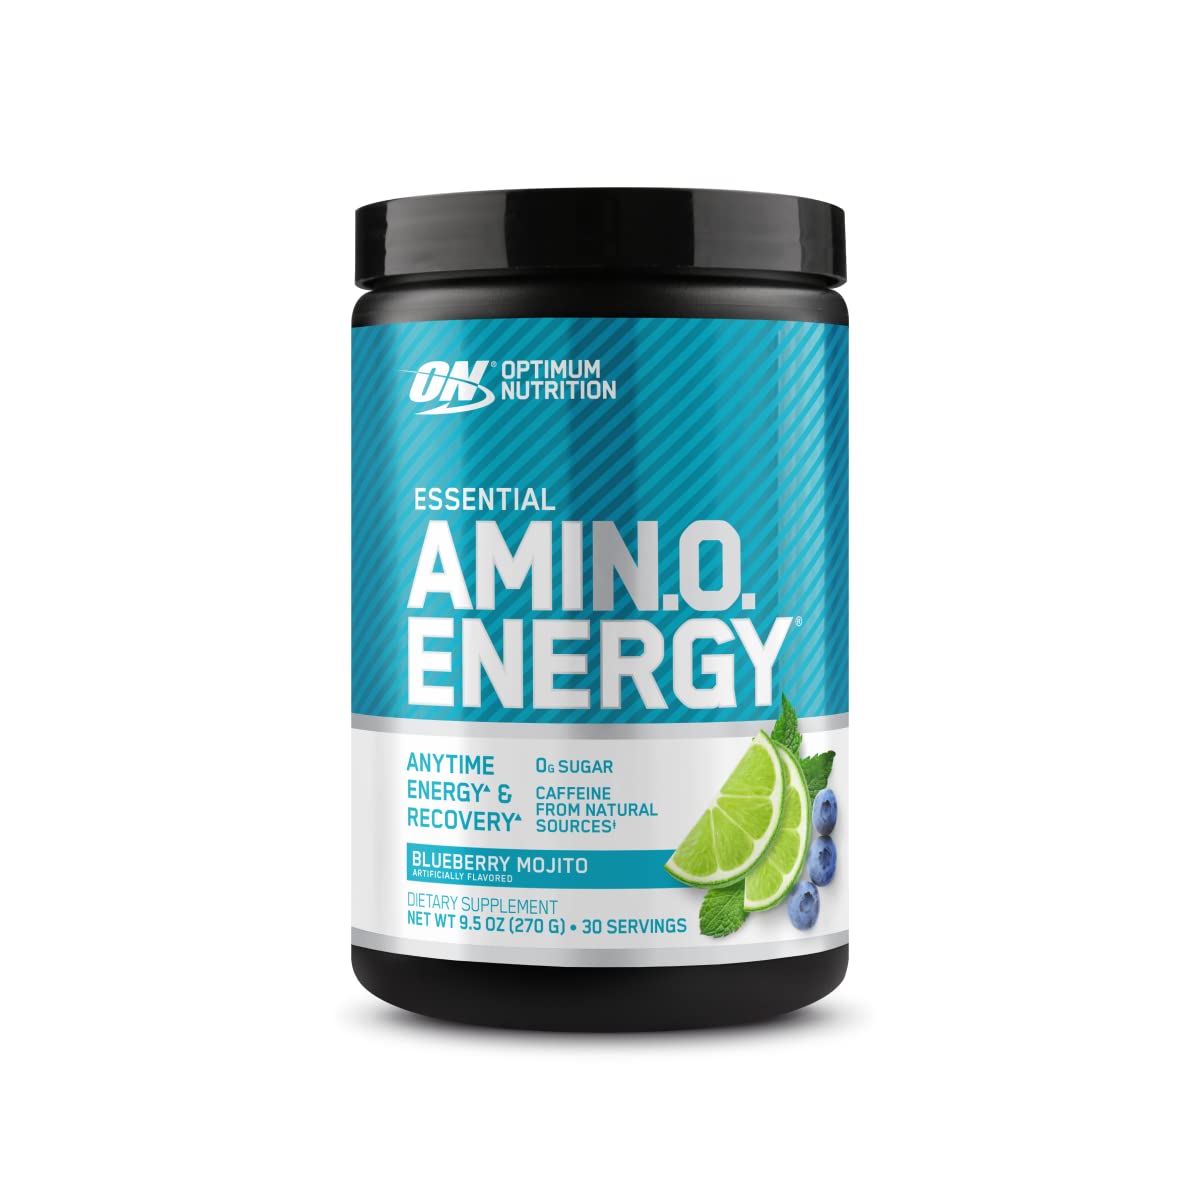 Optimum Nutrition Amino Energy - Pre Workout with Green Tea, BCAA, Amino Acids, Keto Friendly, Green Coffee Extract, Energy Powder - Blueberry Mojito, 30 Servings (Packaging May Vary)